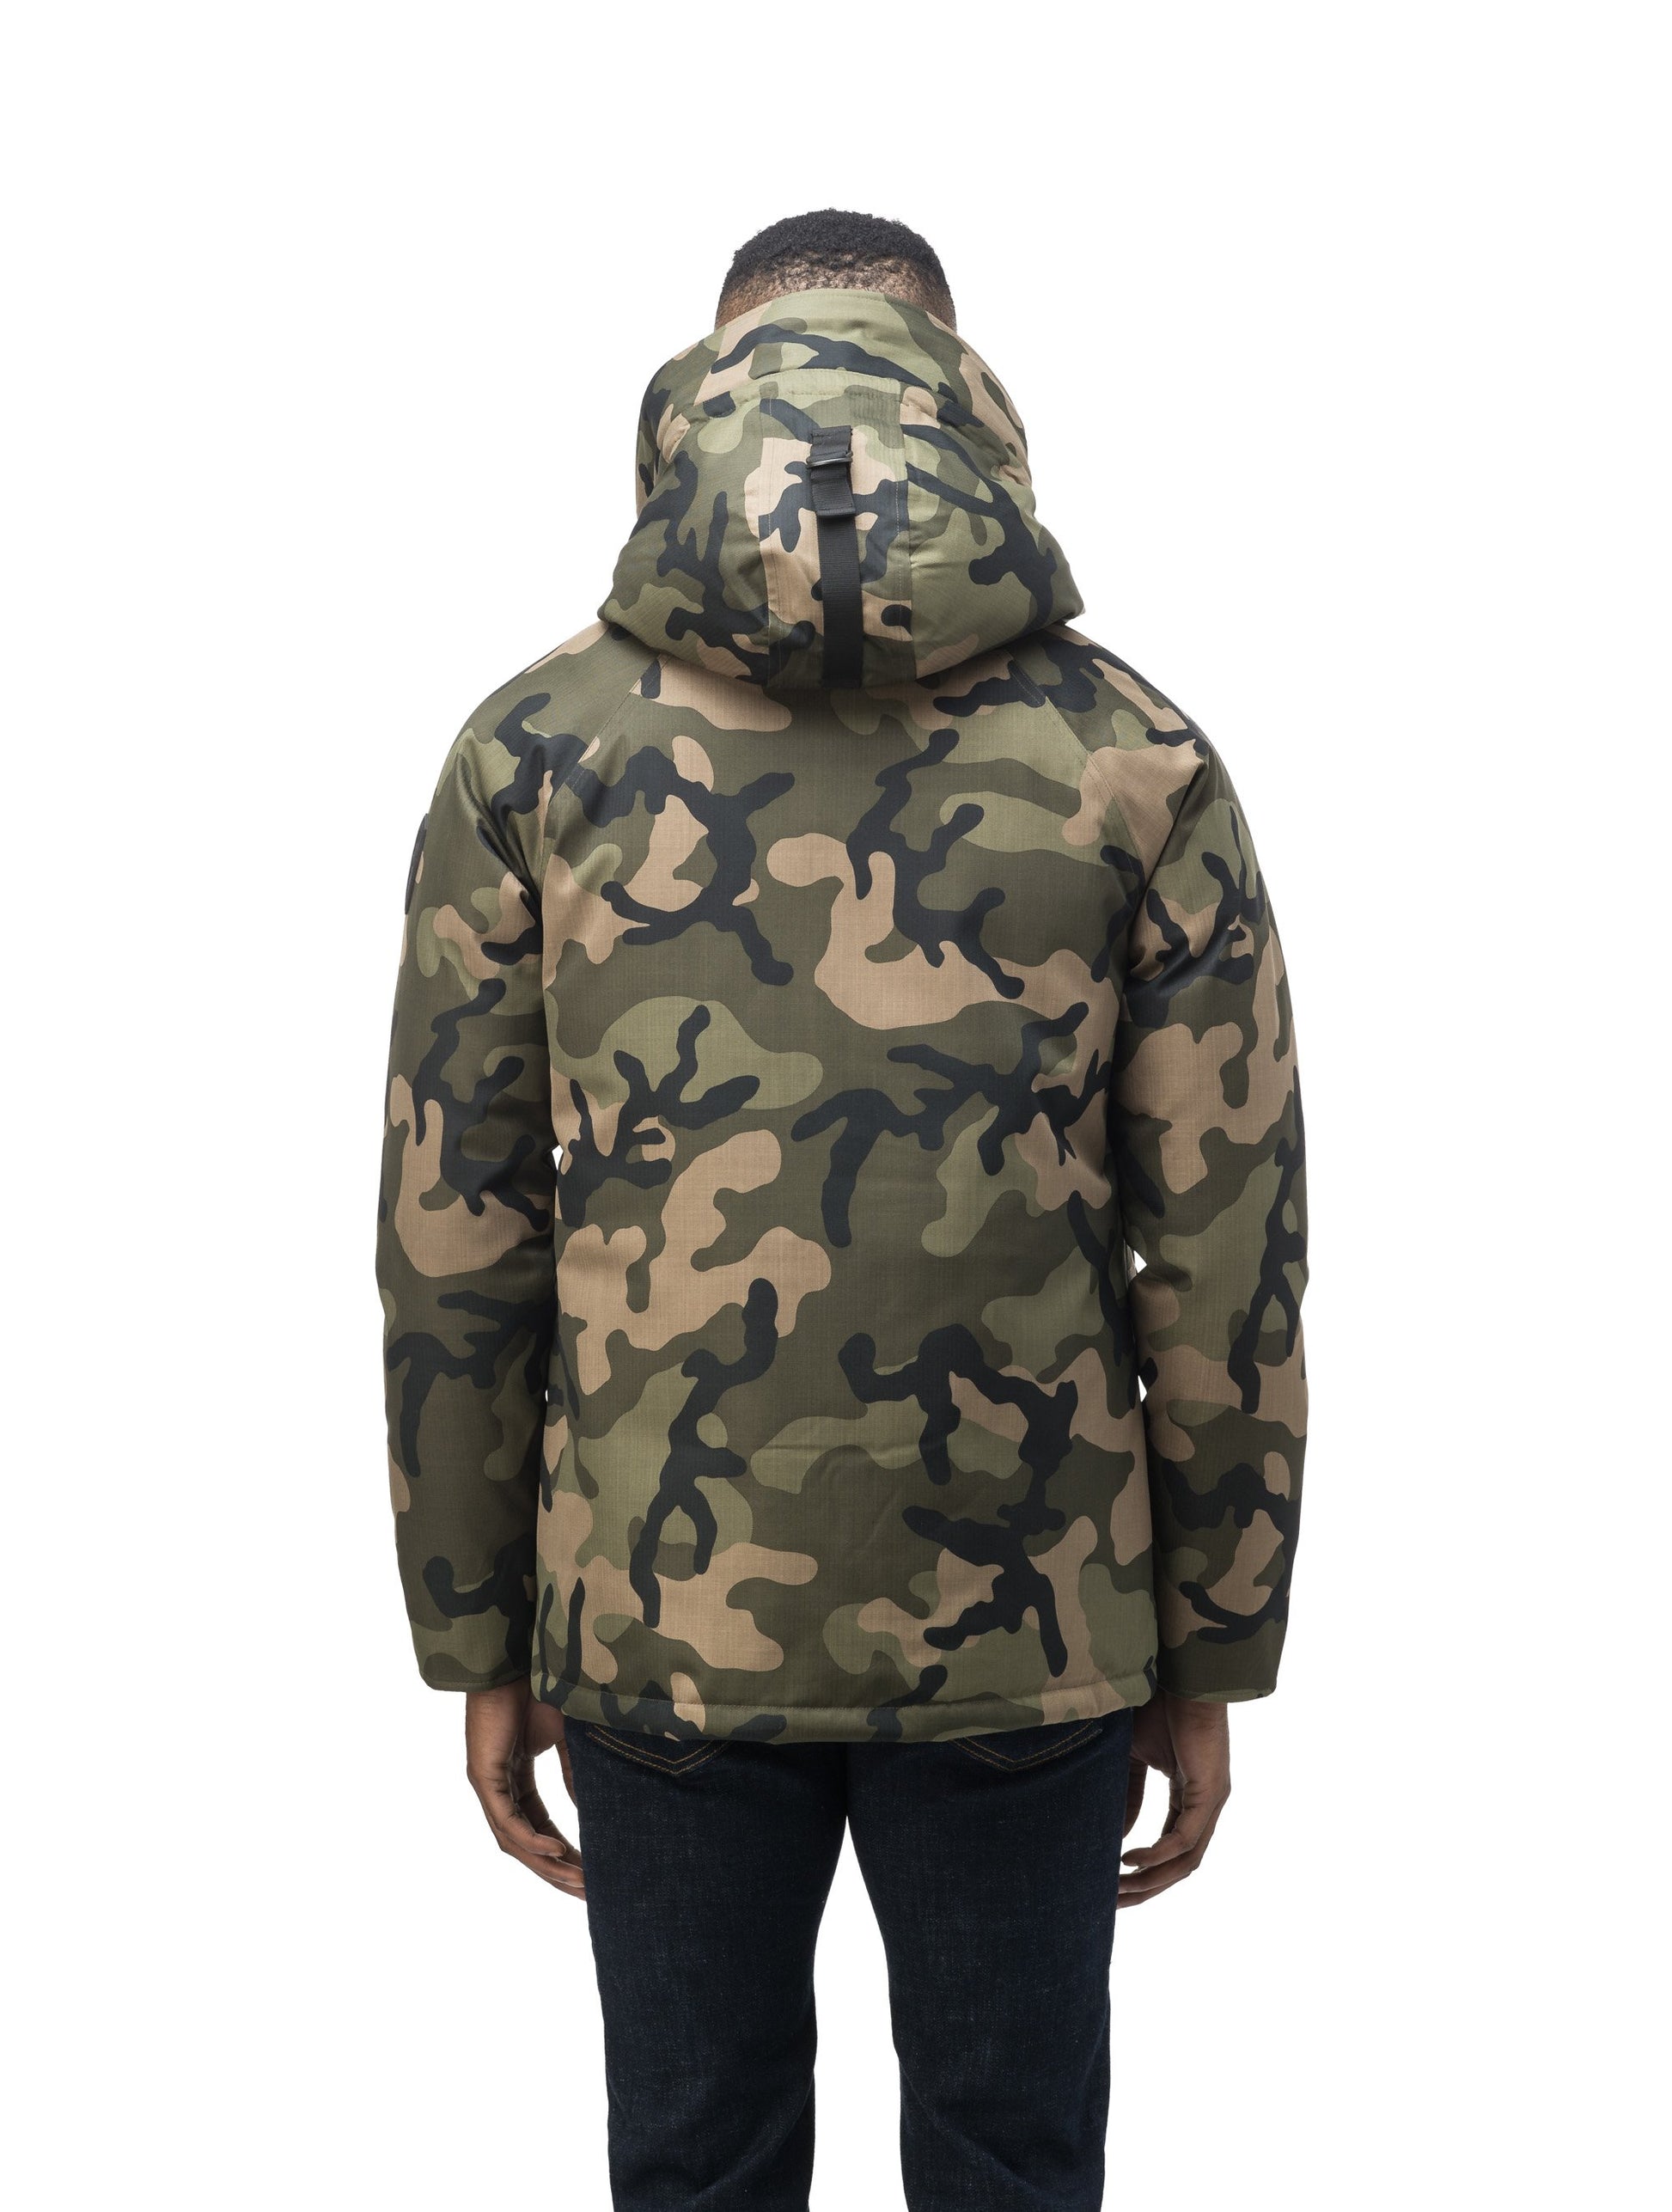 Men's waist length down filled jacket with two front pockets with magnetic closure and a removable fur trim on the hood in CH Camo